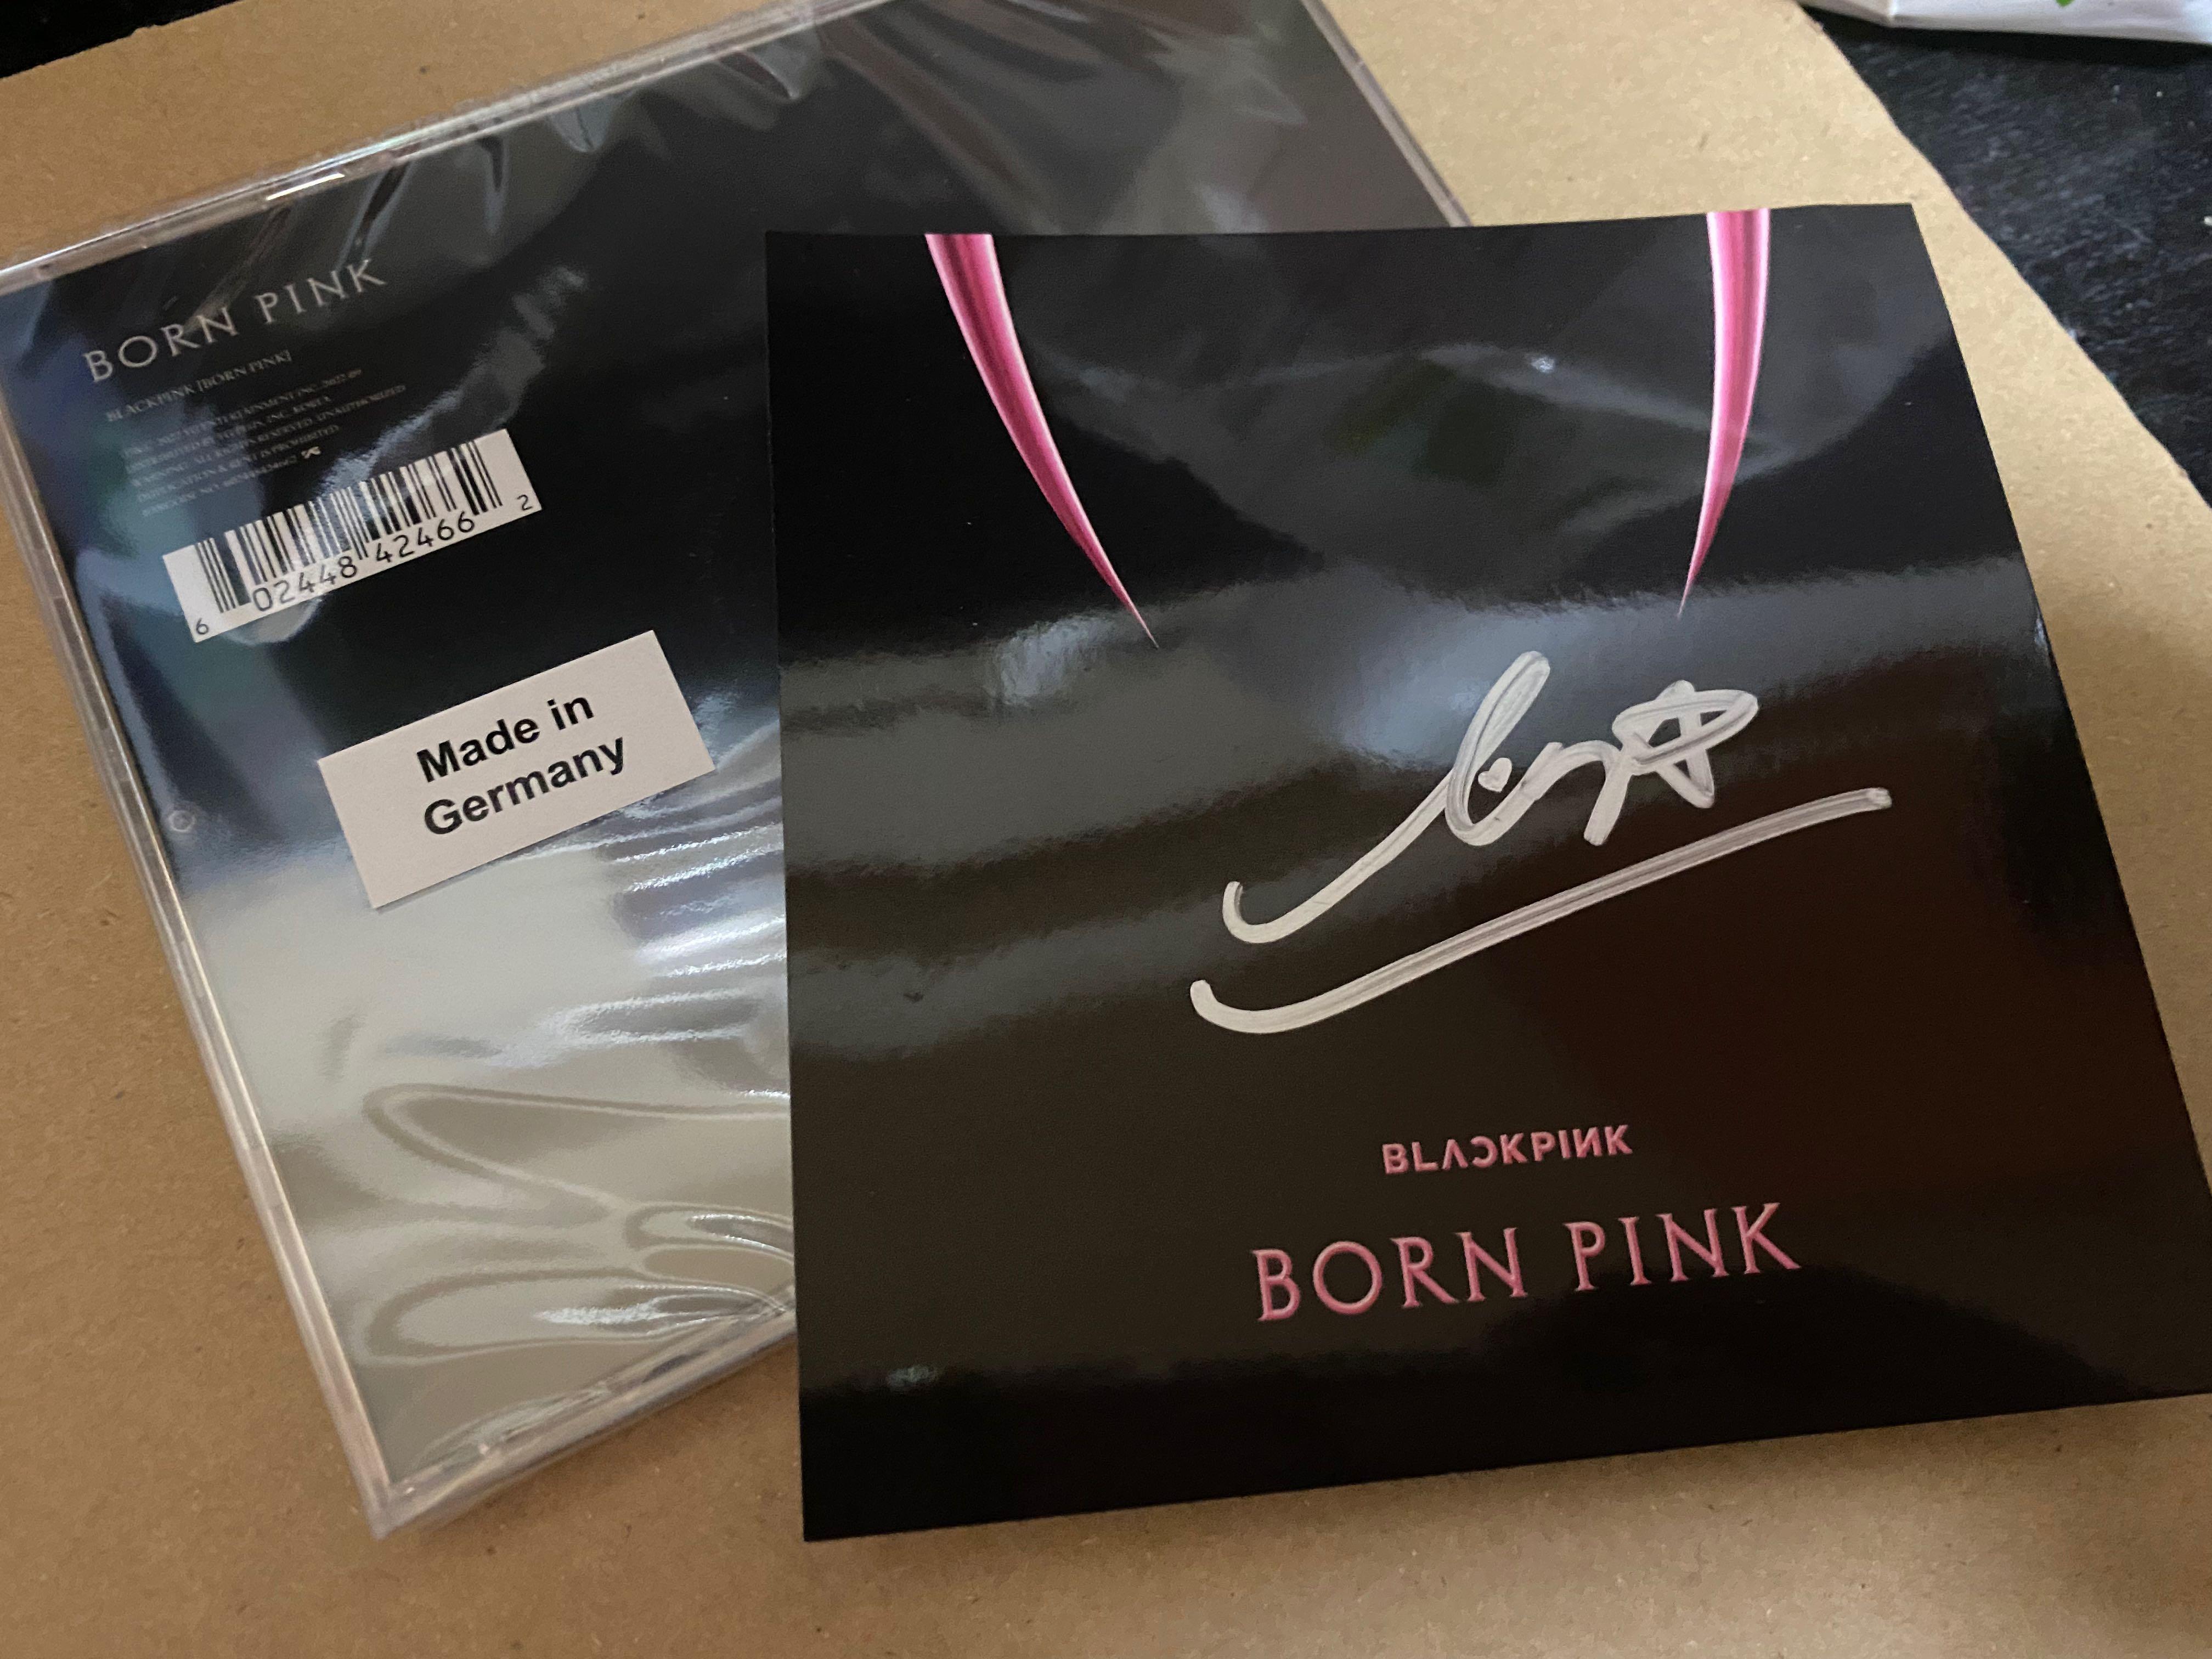 LISA SIGNED ART CARD WITH BORN PINK DIGIPACK